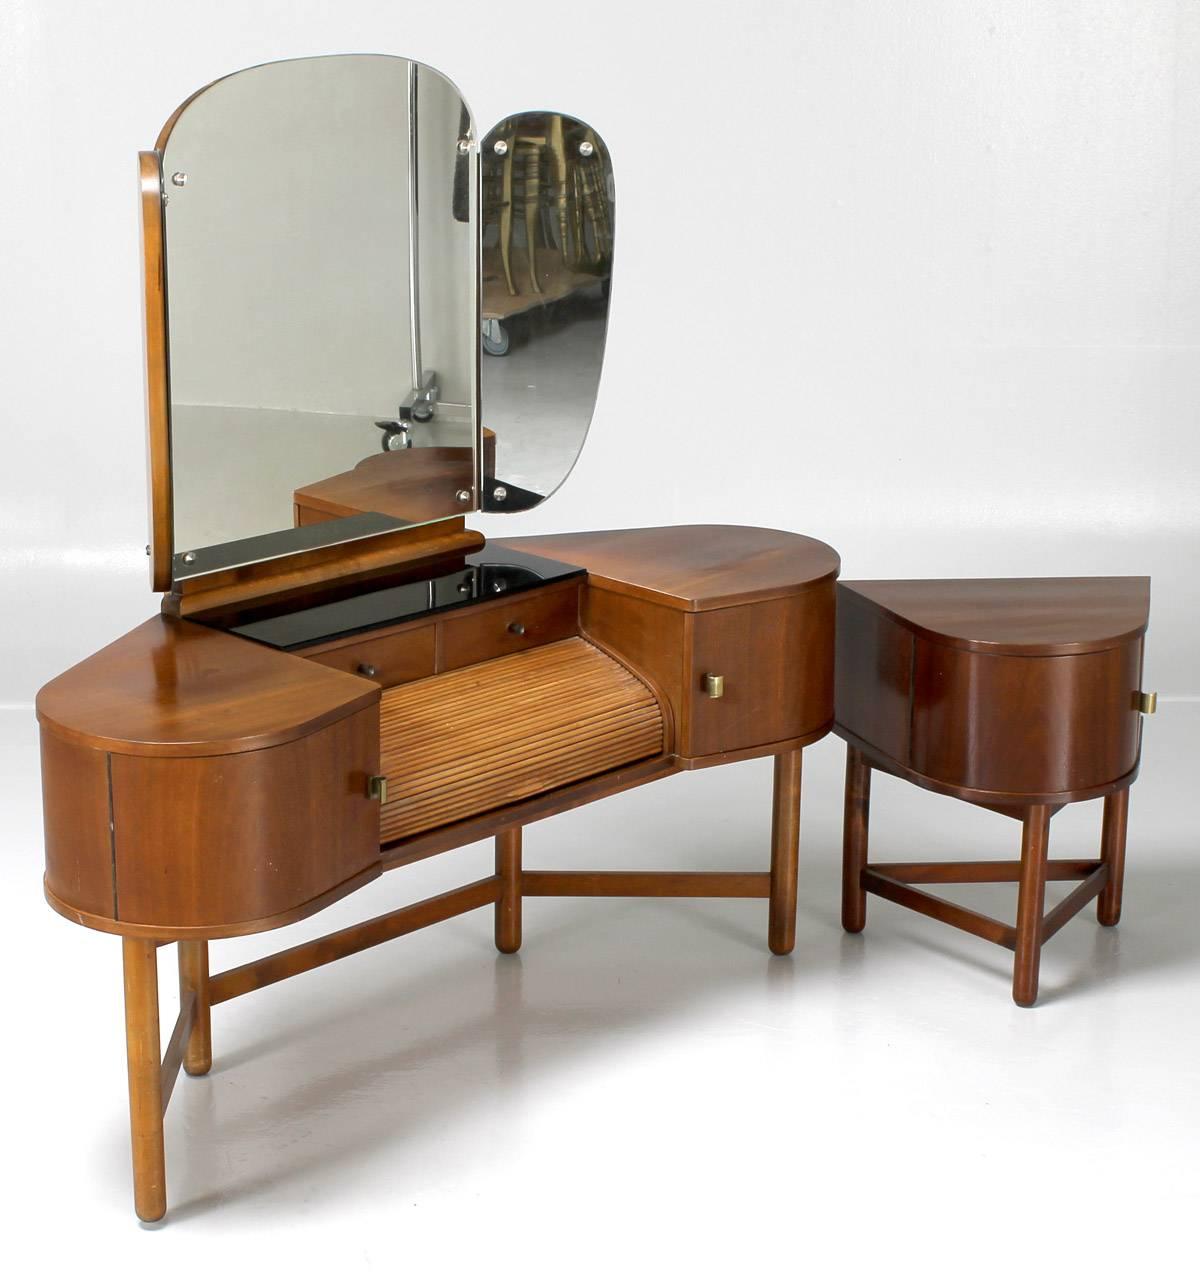 Vanity table and occasional table produced by master cabinetmaker Martinus Petersen, Denmark, 1930s.

Mahogany with tambour door and black glass panel. Three-section mirror.